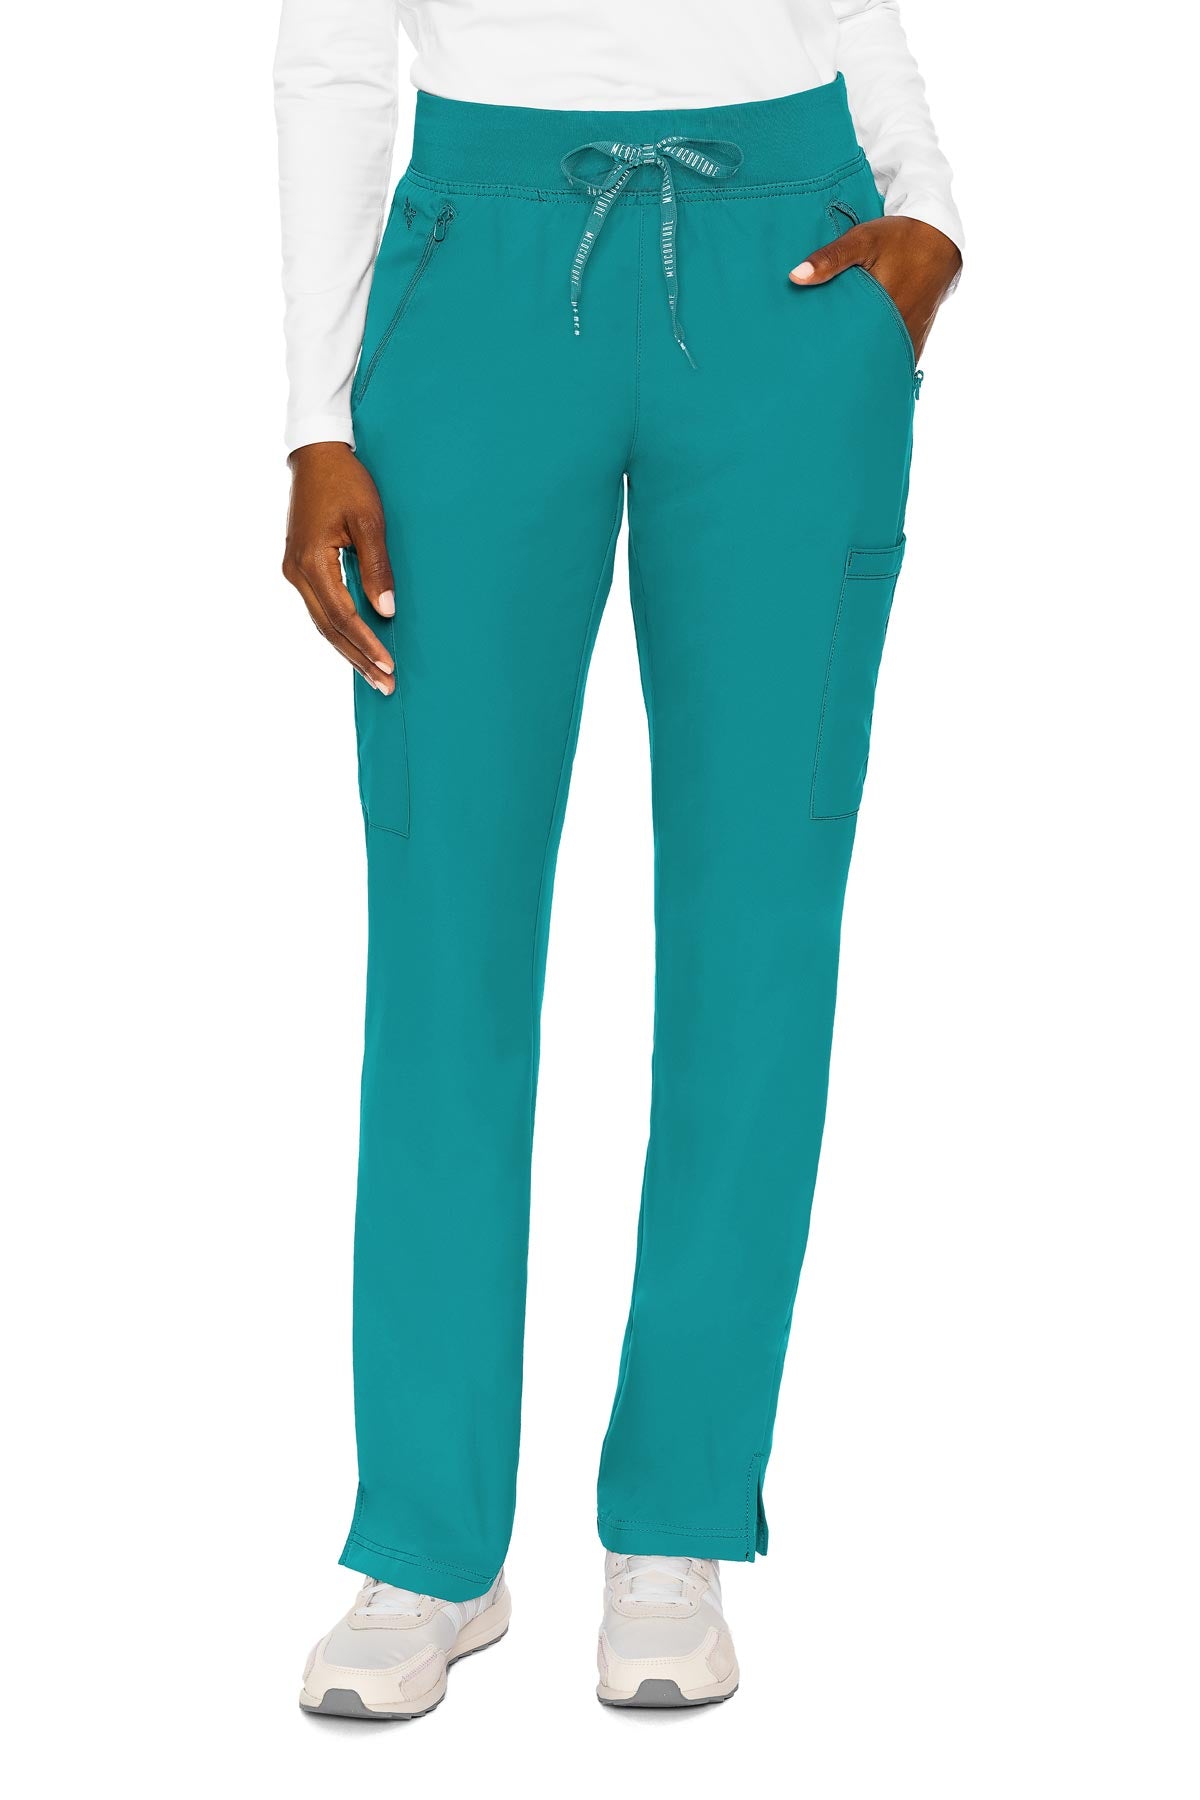 MED COUTURE Zipper Pant Tall